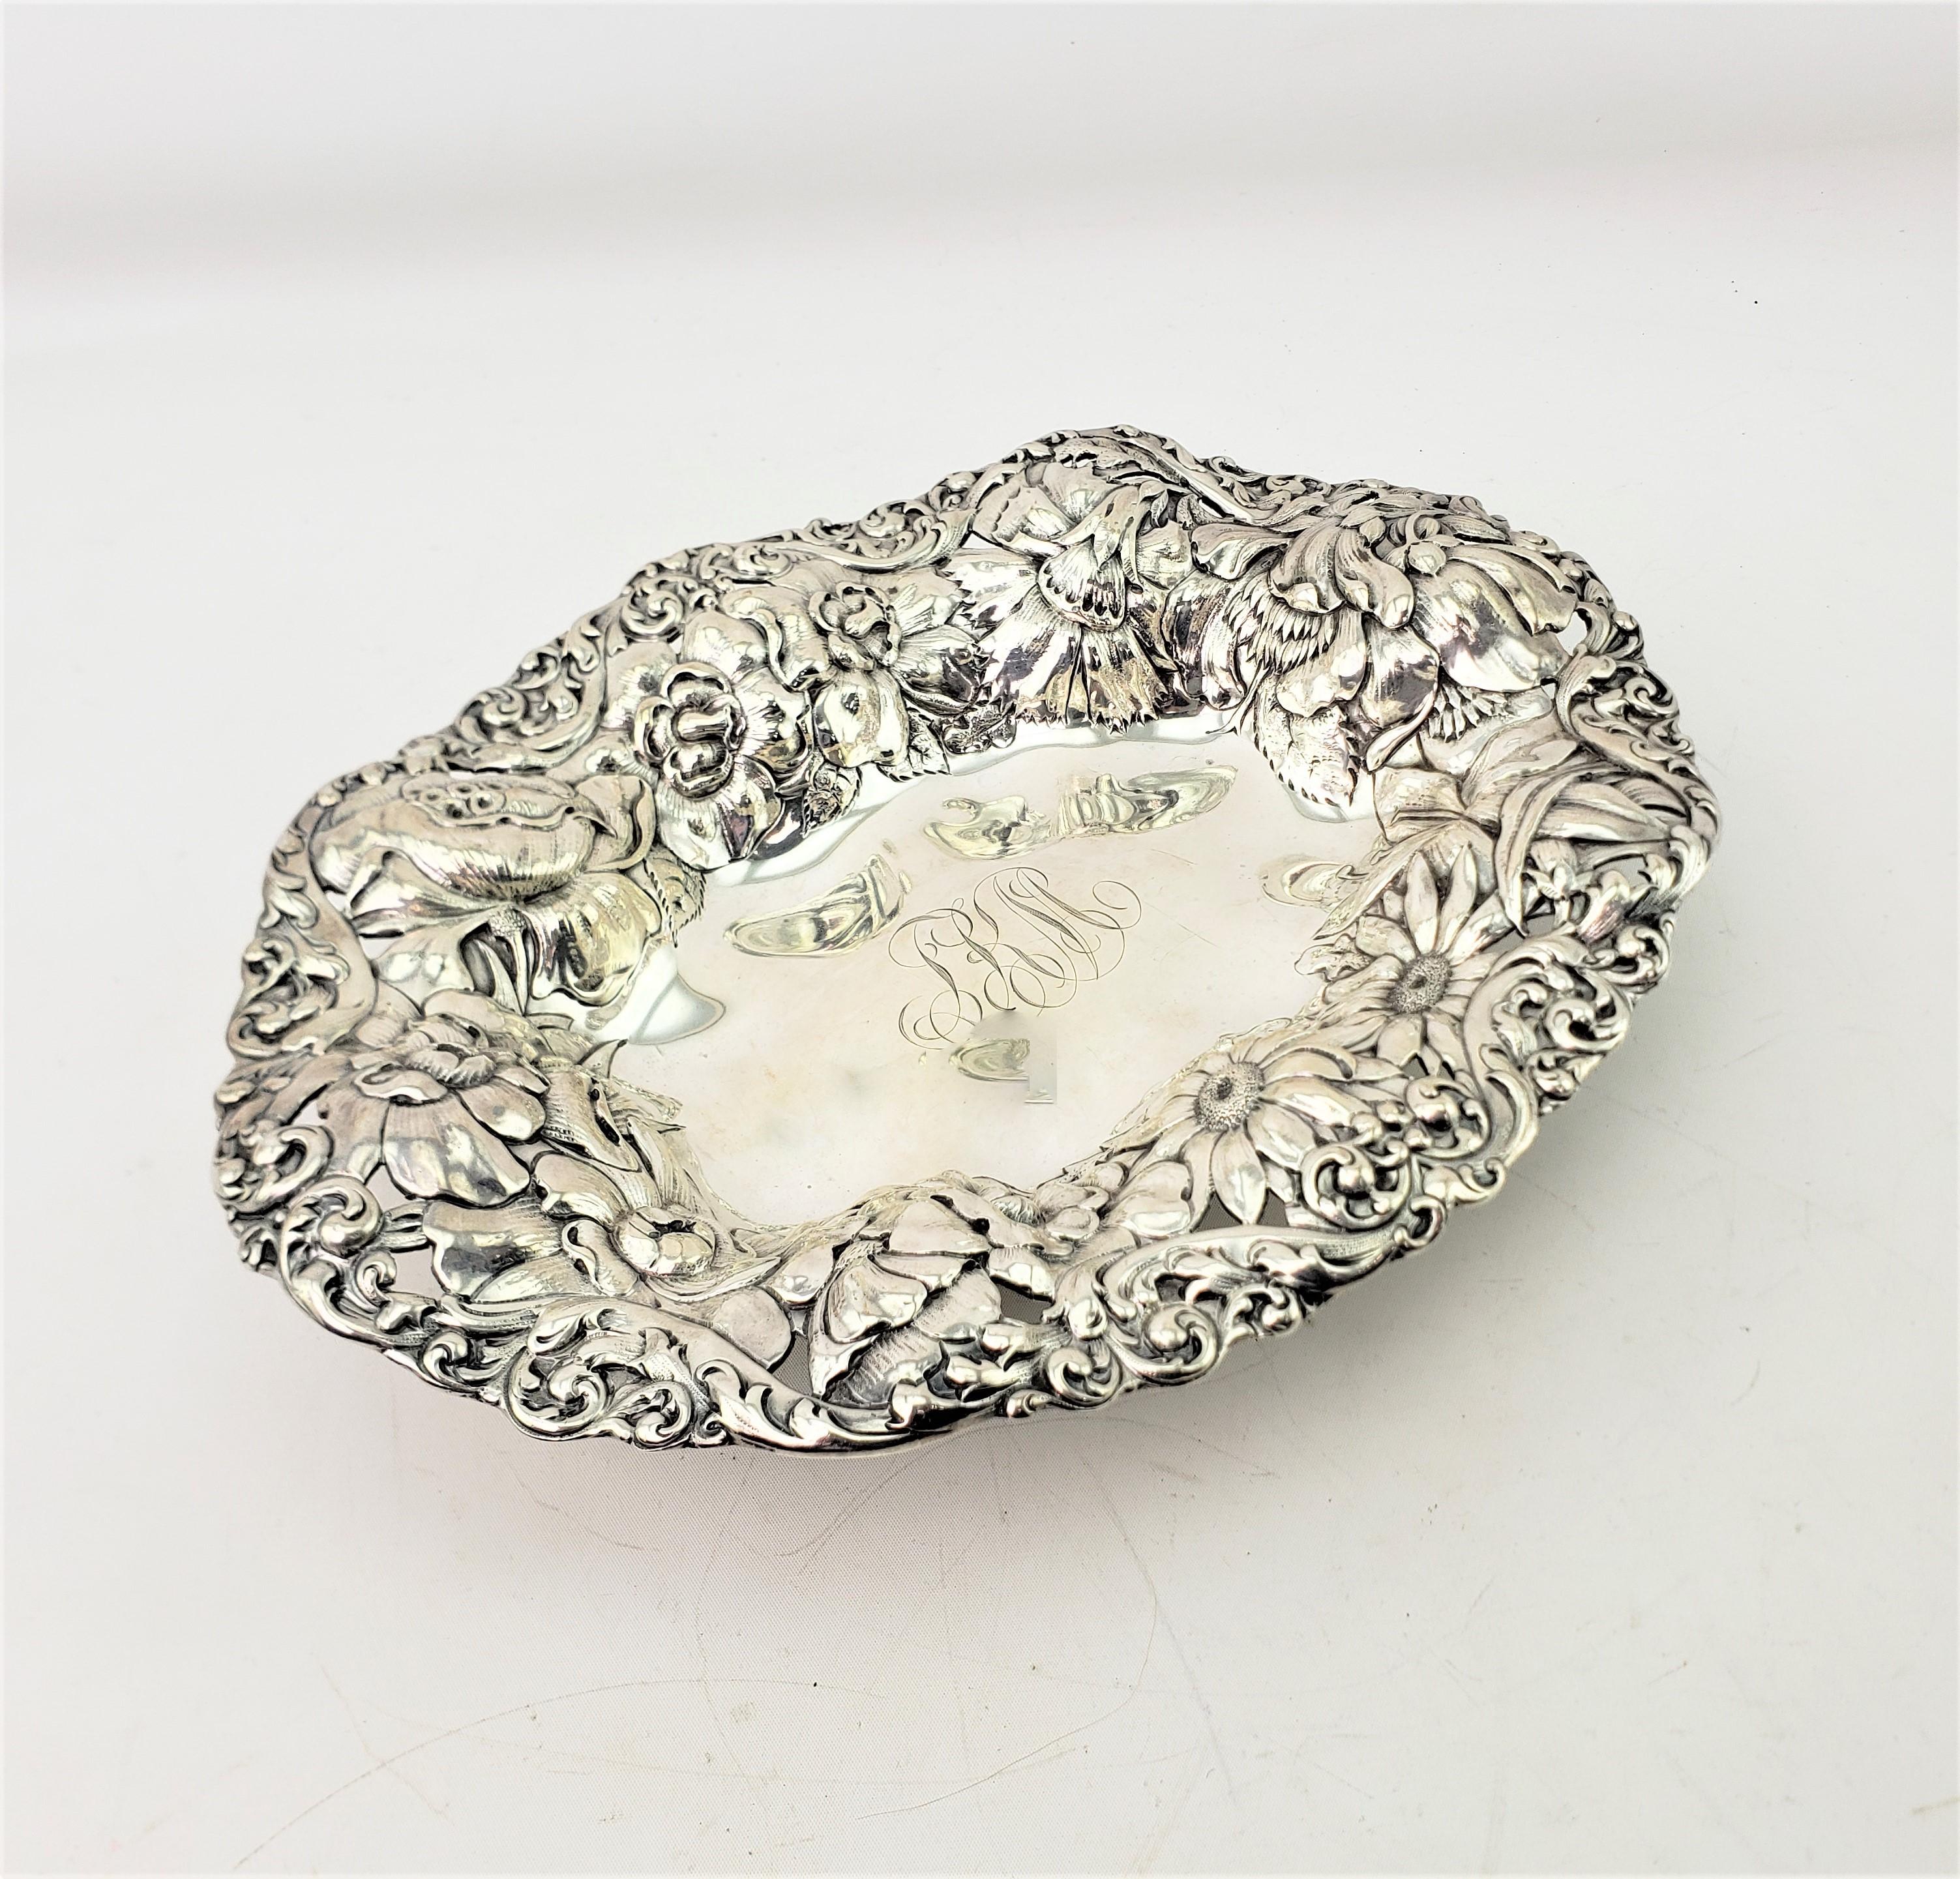 This antique and very ornate bowl was made by the renowned Gorham Company of the United States and dates to approximately 1890 and done in the period Art Nouveau style. The bowl is composed of sterling silver and is quite heavy weighing 670 grams